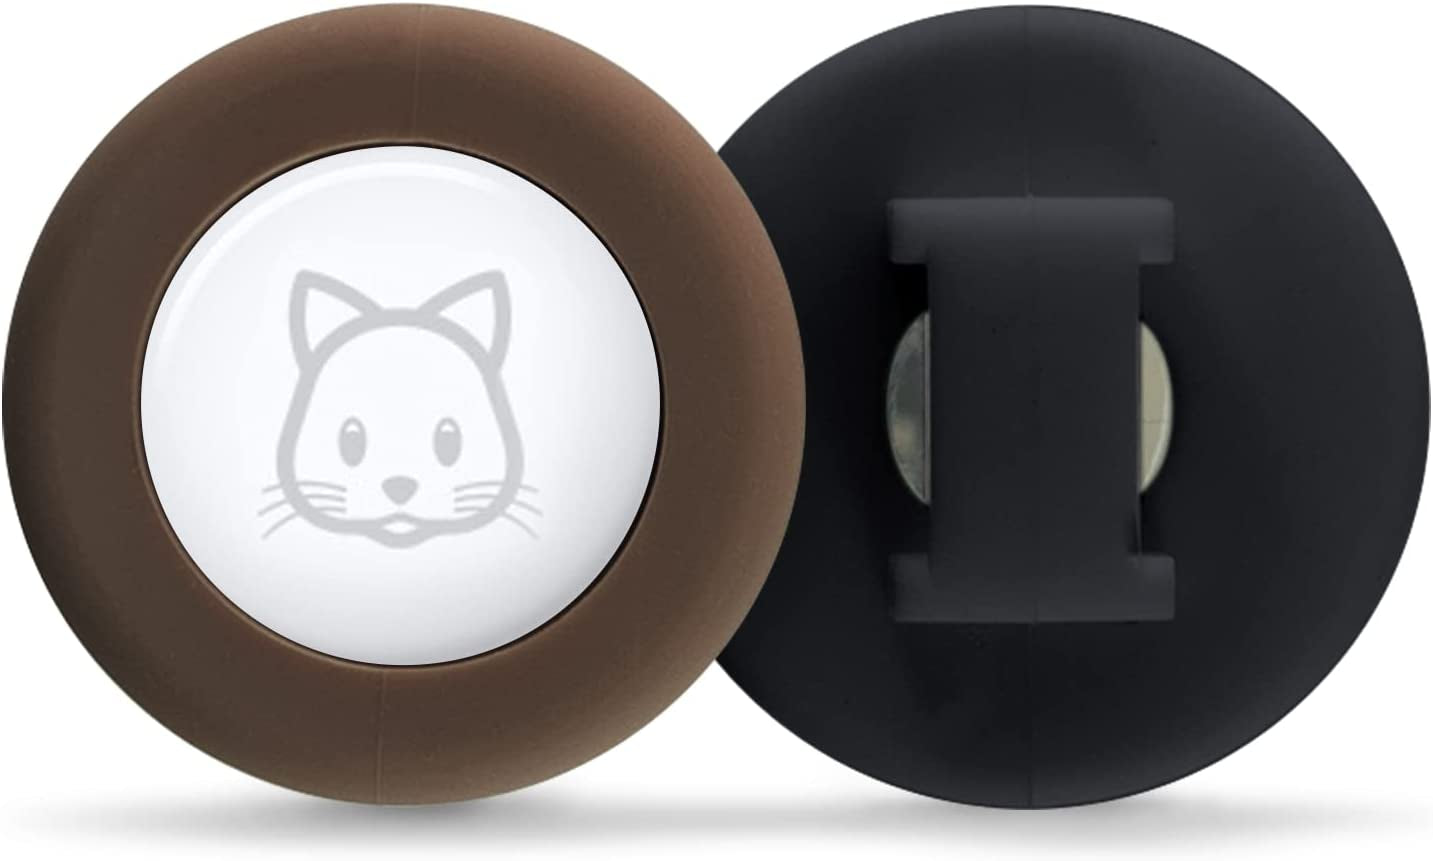 Sweet Baby Co. Airtag Cat Collar or Extra Small Dog Collar Holder 2 Pack, Fits Half Inch Collars for Small Pet, Compatible with Apple Air Tag, Waterproof GPS Tracker Case Kitten Cats